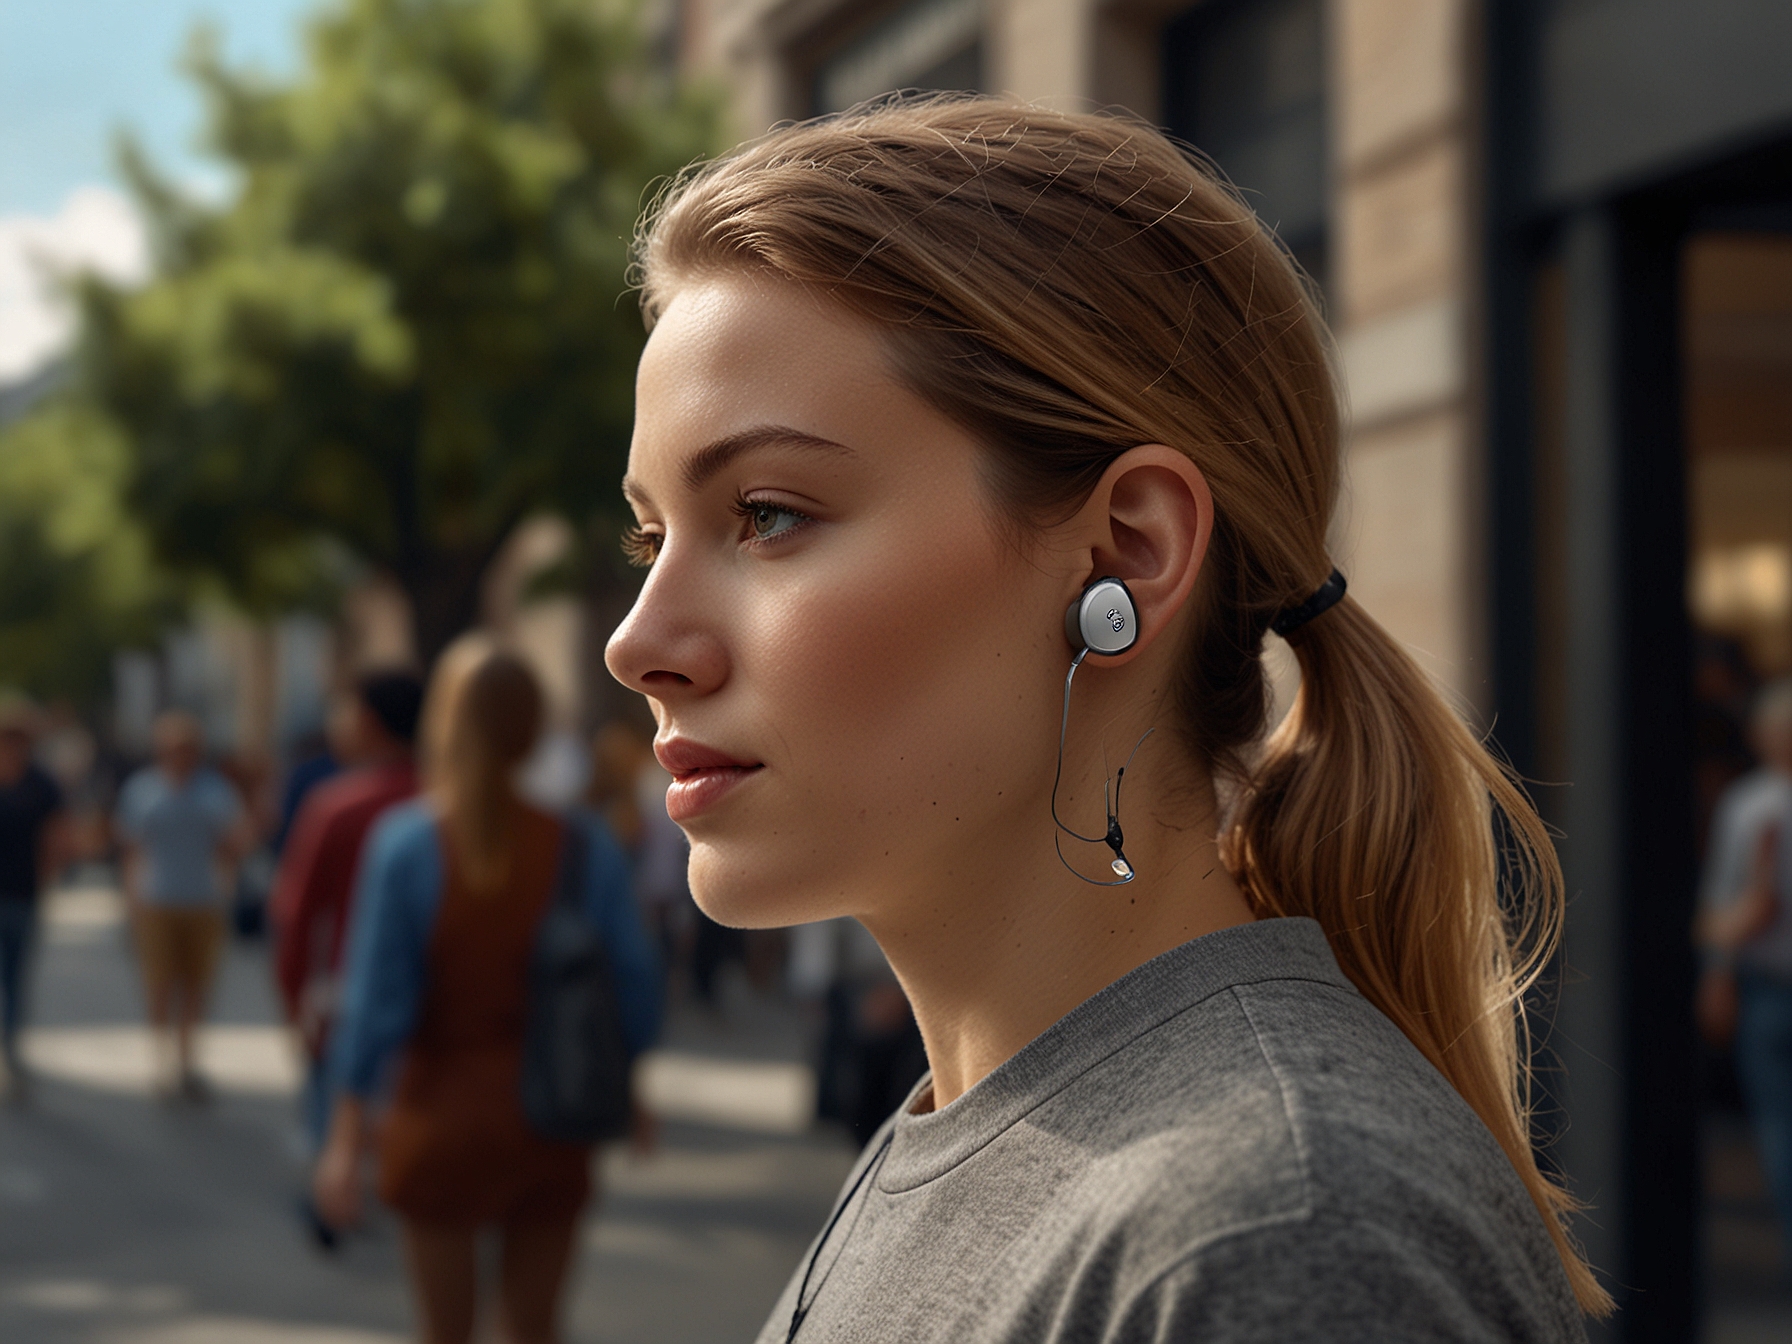 A user demonstrates the active noise cancellation feature of the Sennheiser Accentum True Wireless earbuds, effectively minimizing ambient noise in a bustling street, providing an immersive listening experience.